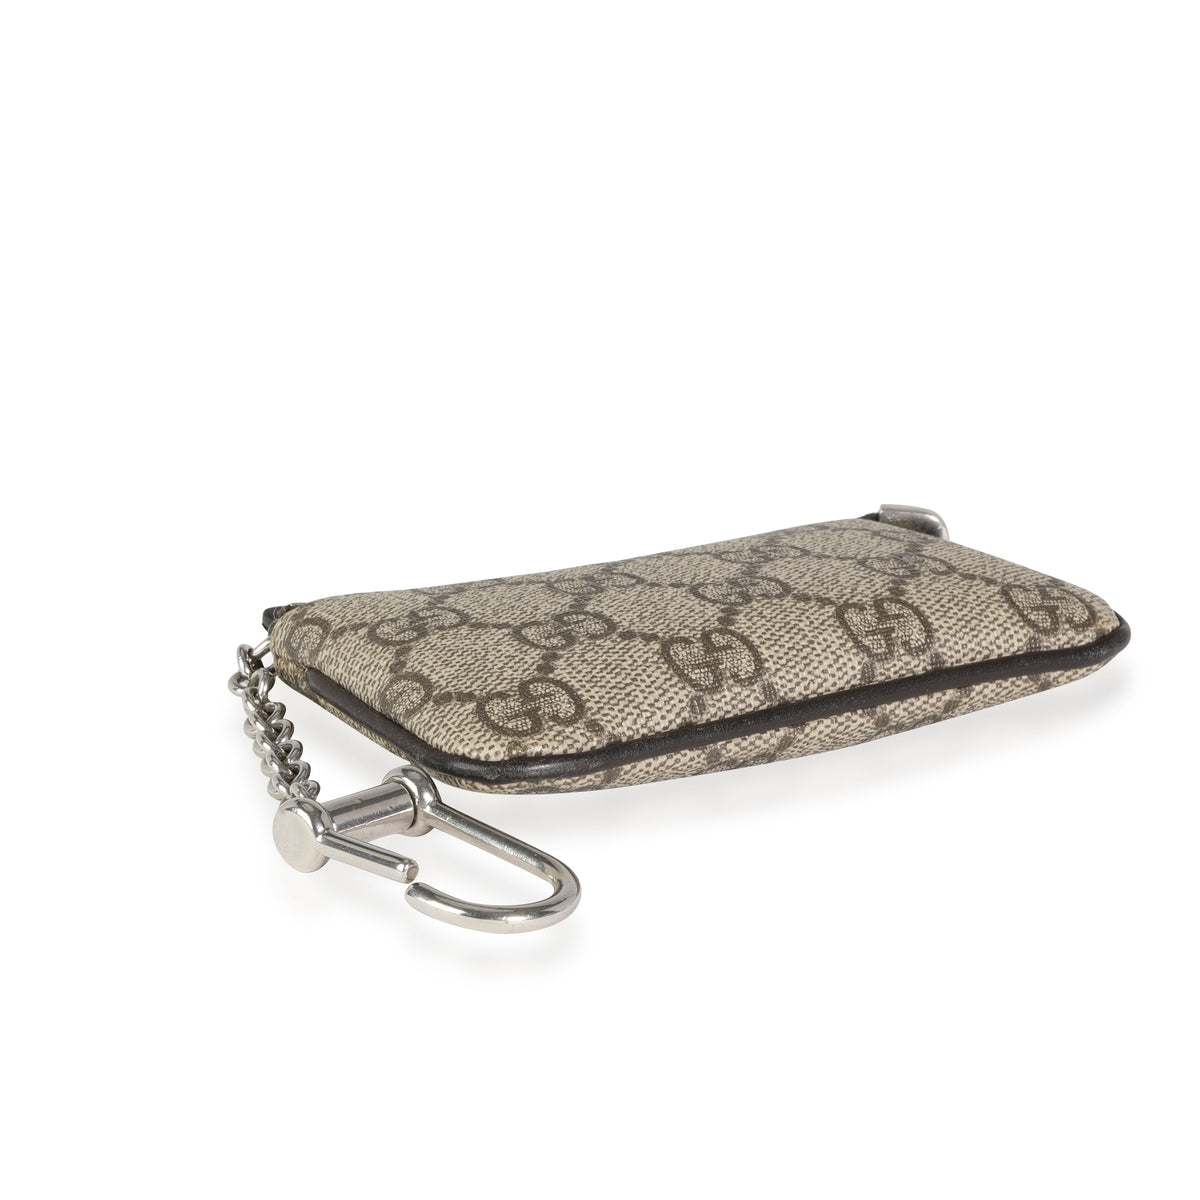 Gucci Ophidia Key Pouch in Beige Ebony GG Supreme with Classic Vintage Web  - SOLD